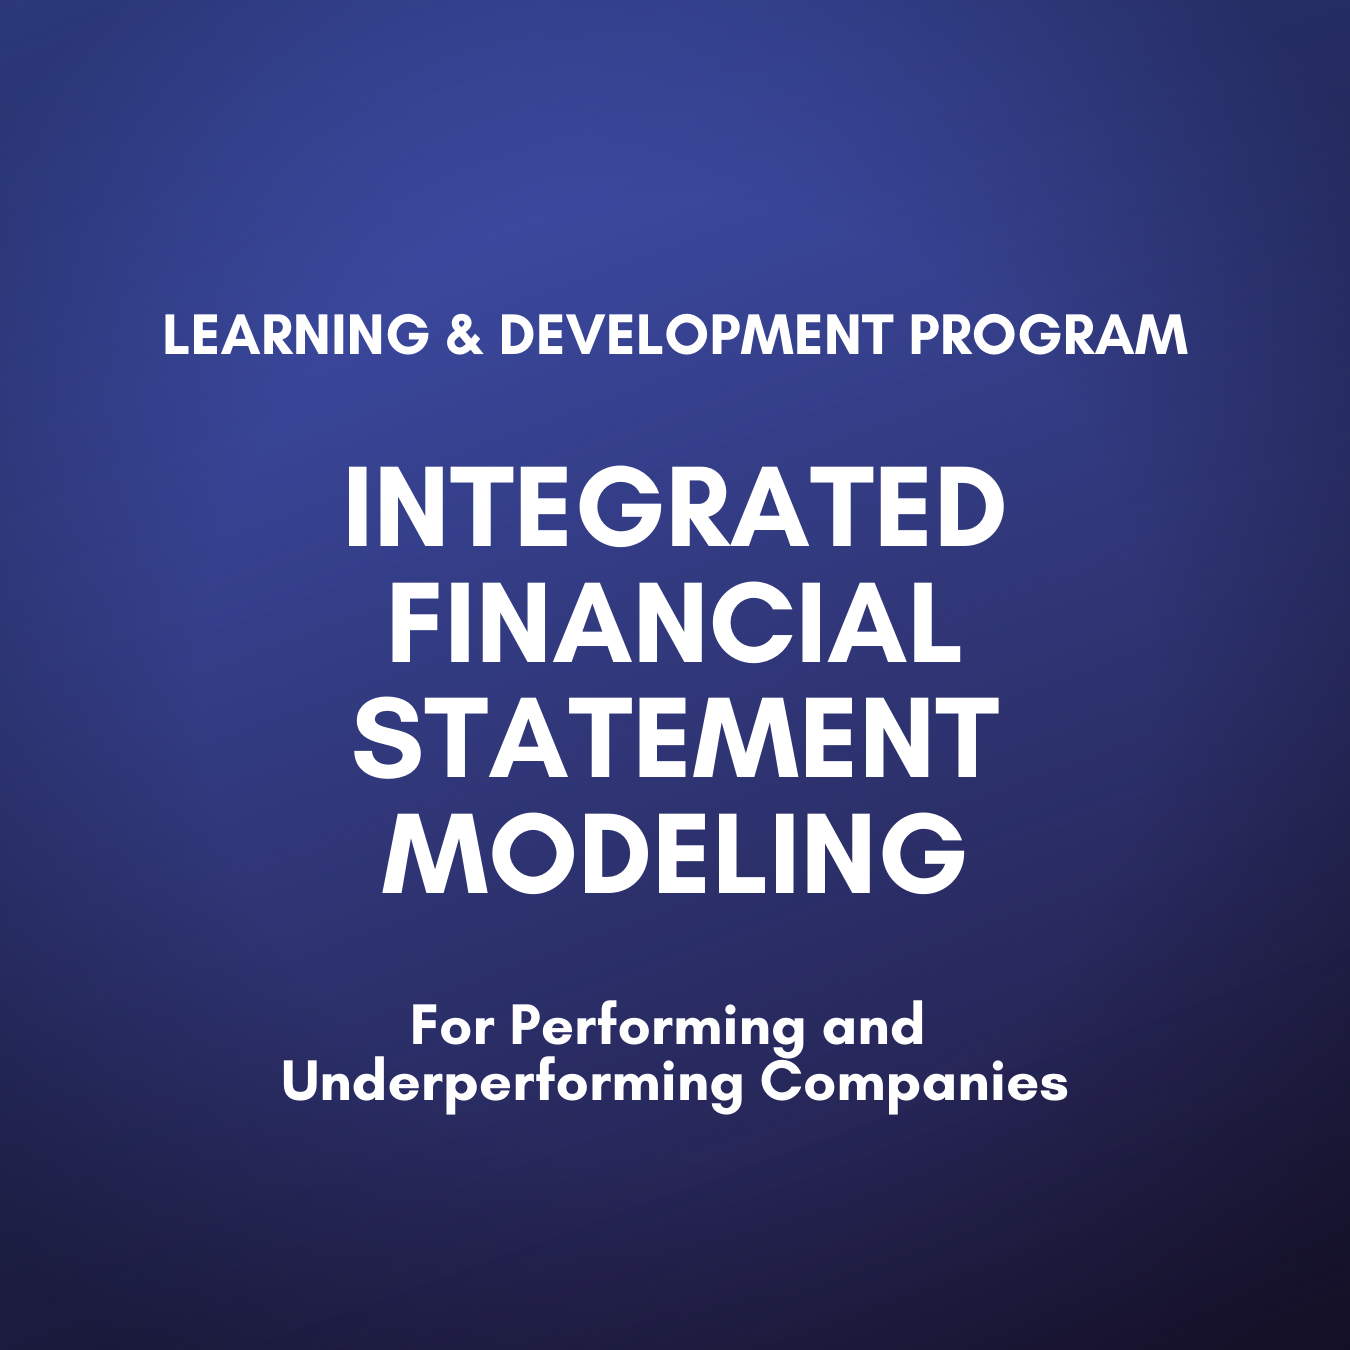 Integrated Financial Statement Modeling for Performing and Underperforming Companies